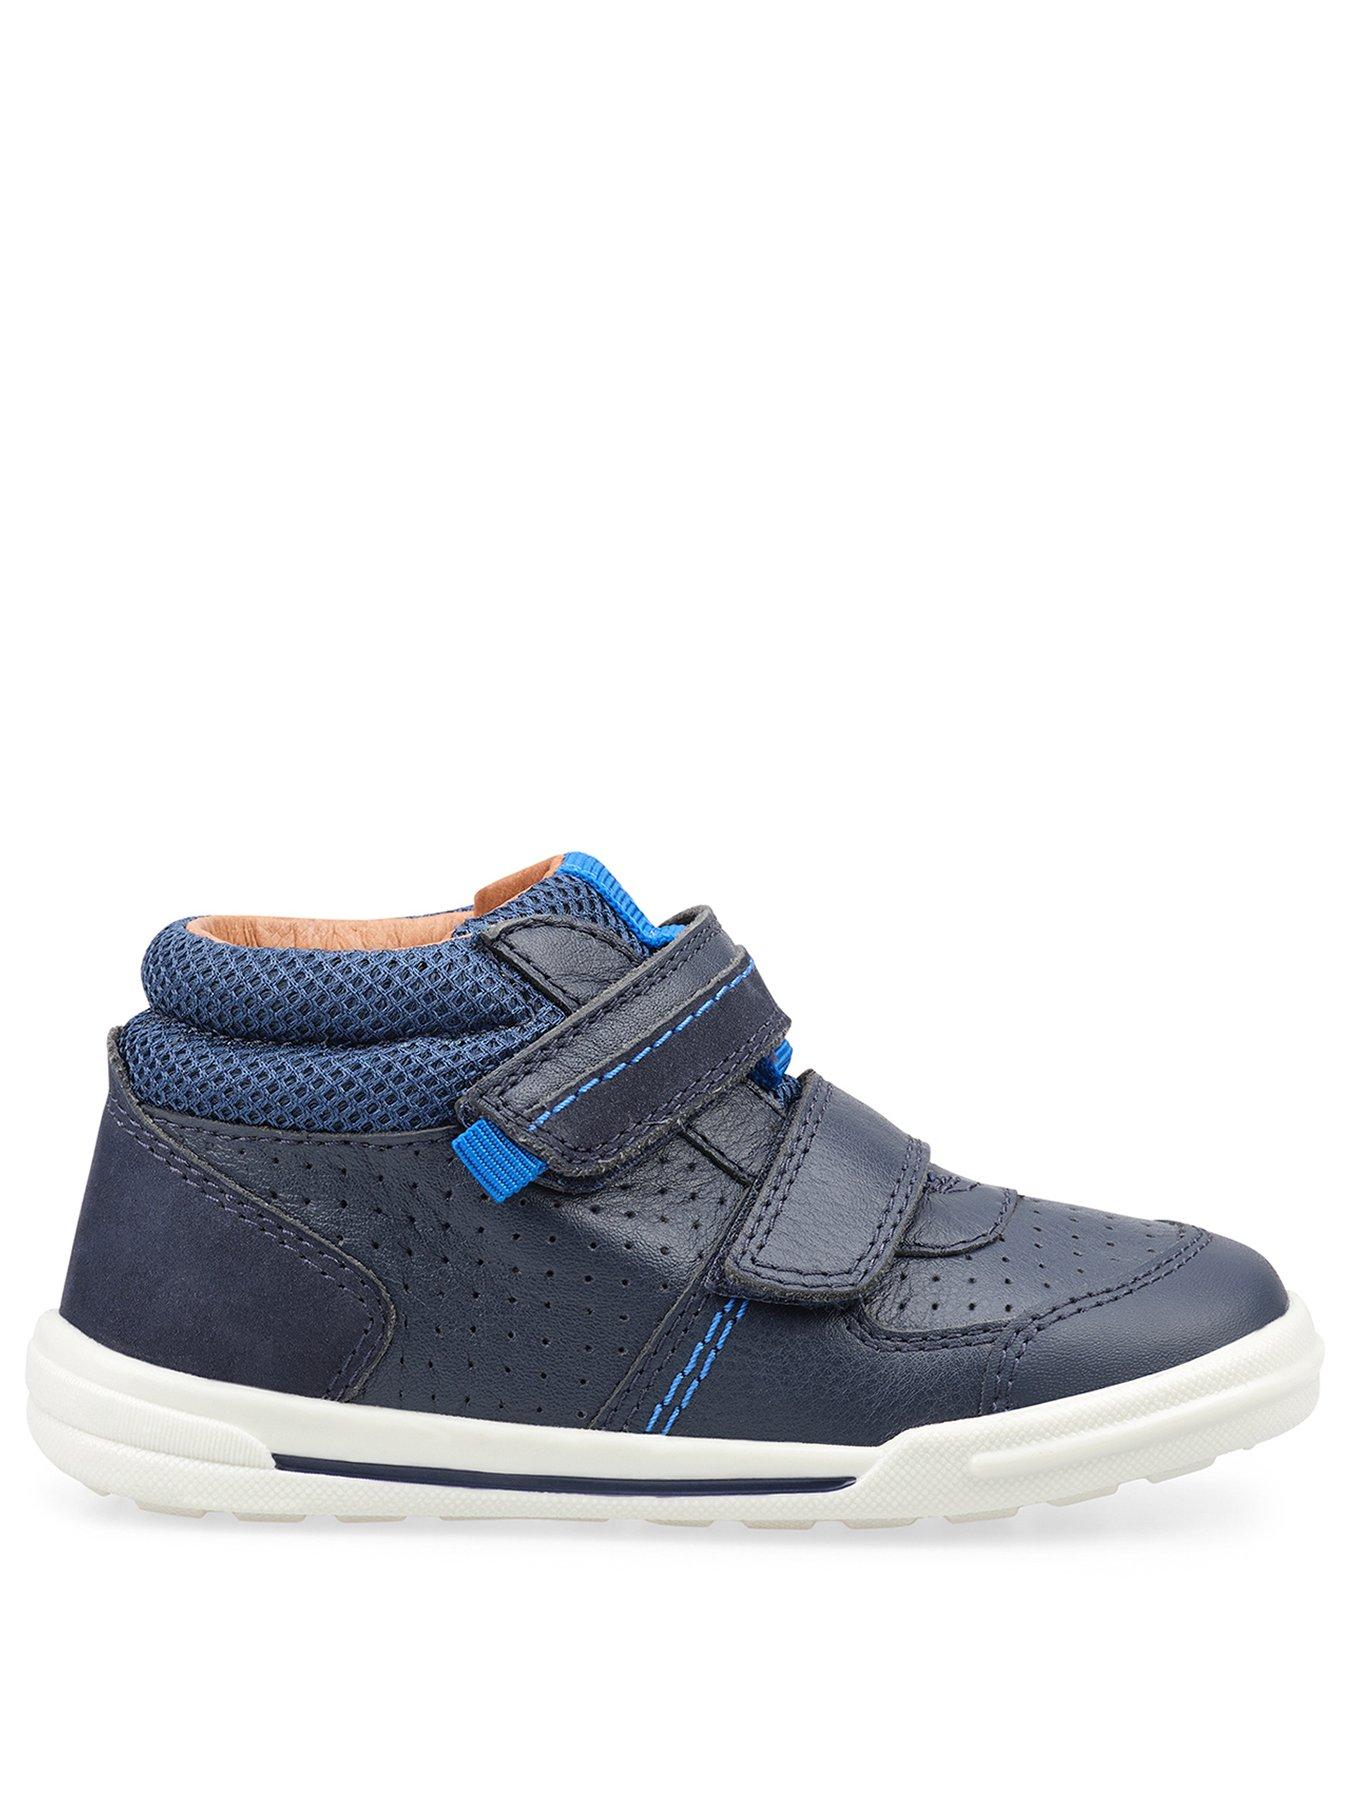 Shoes & boots Frisbee High Top Shoe - Navy Leather